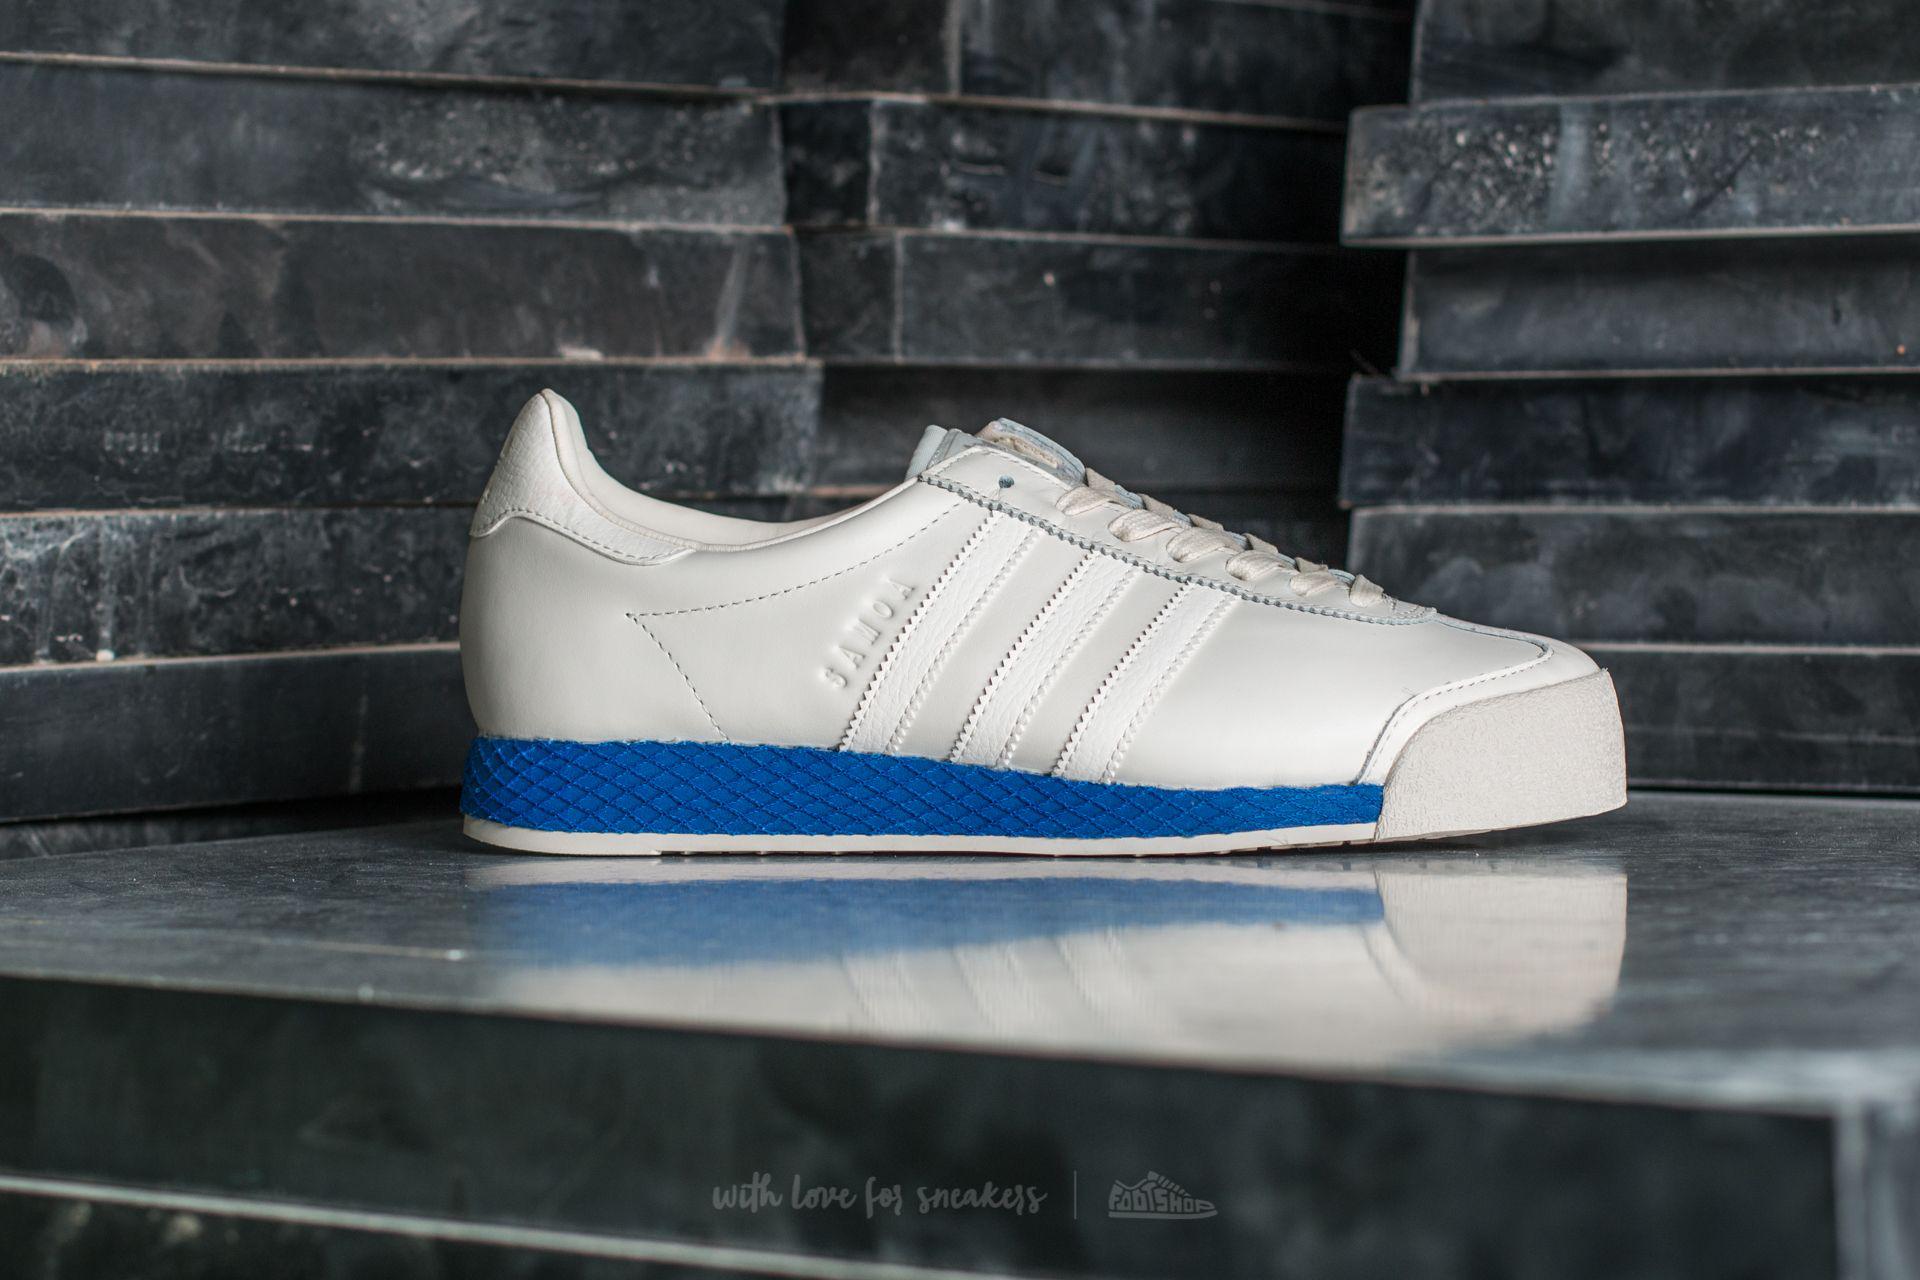 adidas samoa blue and white Online Shopping for Women, Men, Kids Fashion &  Lifestyle|Free Delivery & Returns! -